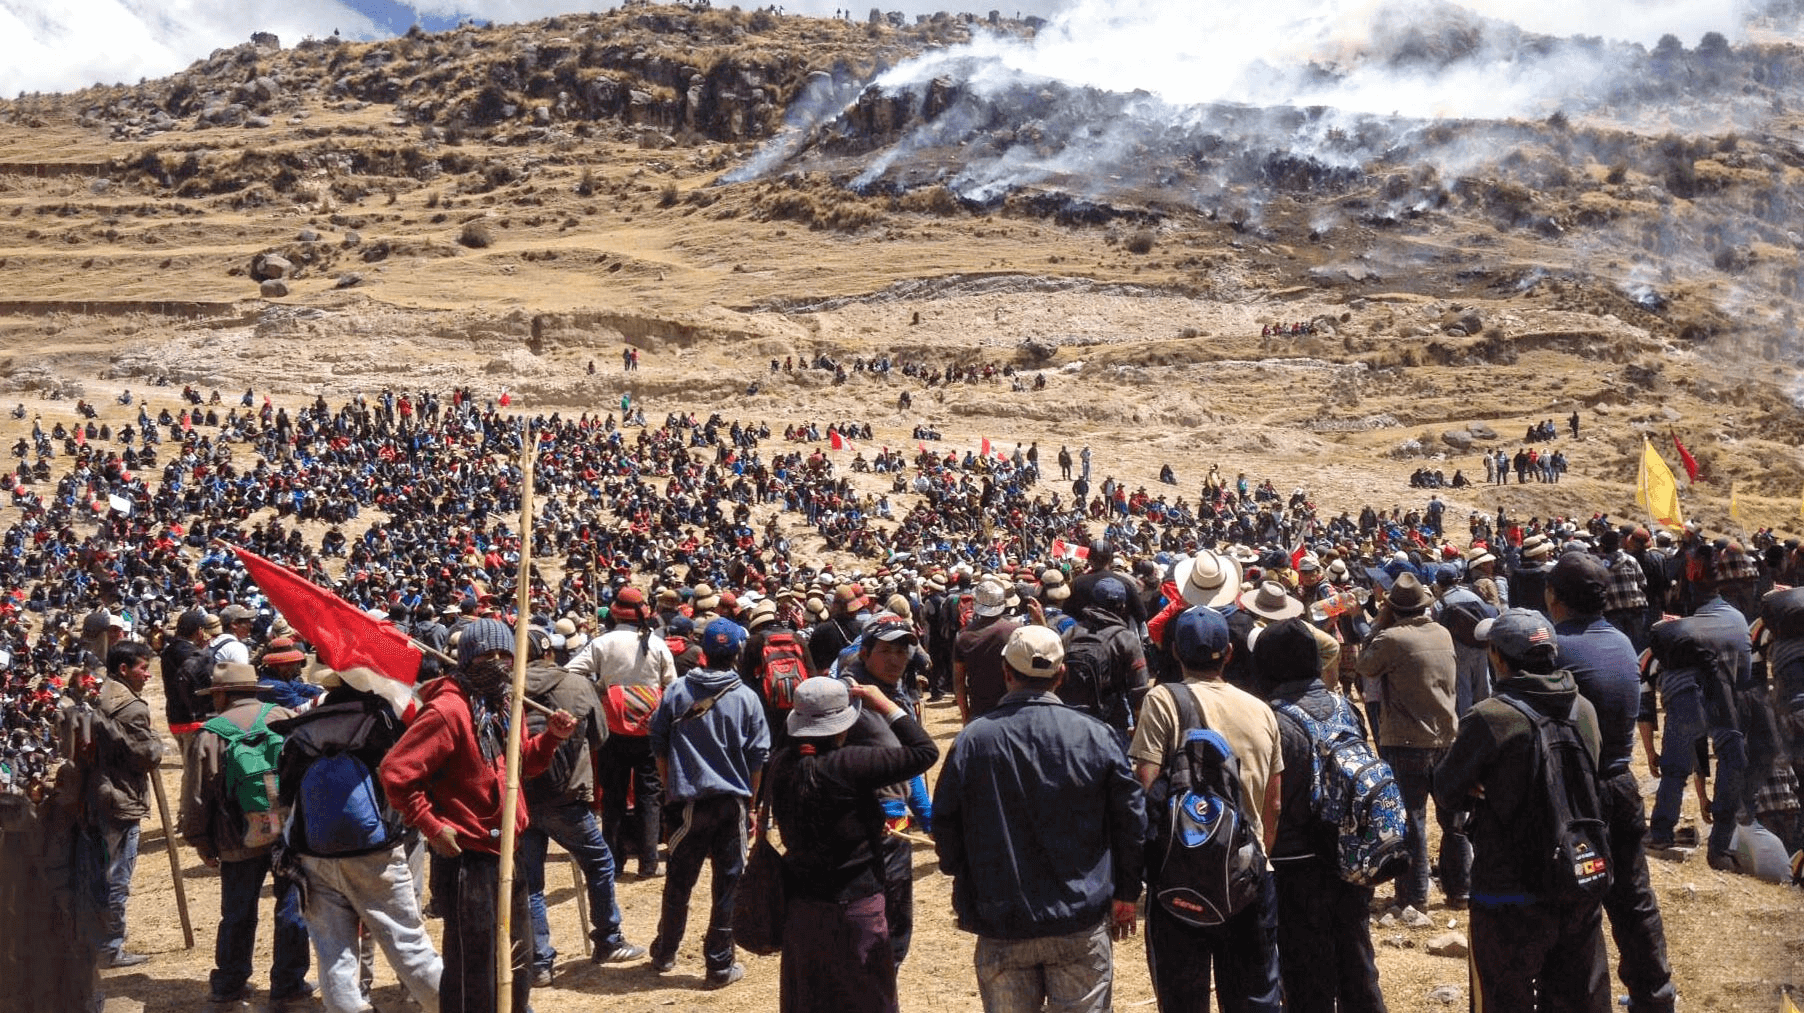 Indigenous Peruvian Community Demands Return of Ancestral Land From Chinese Mining Company